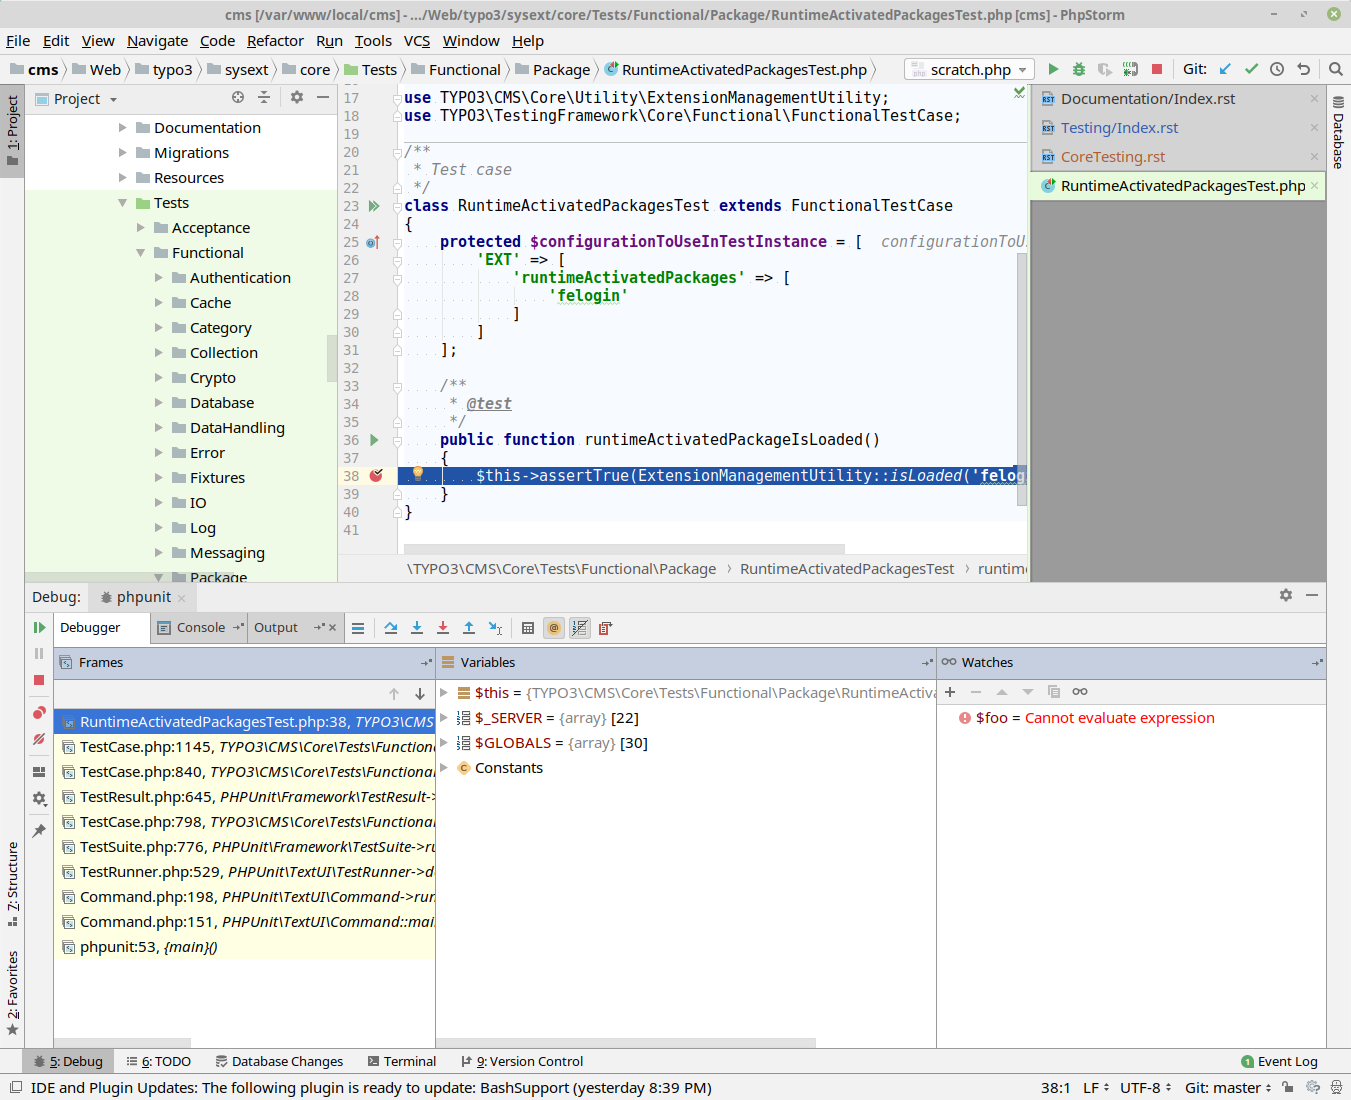 Phpstorm with active debug session